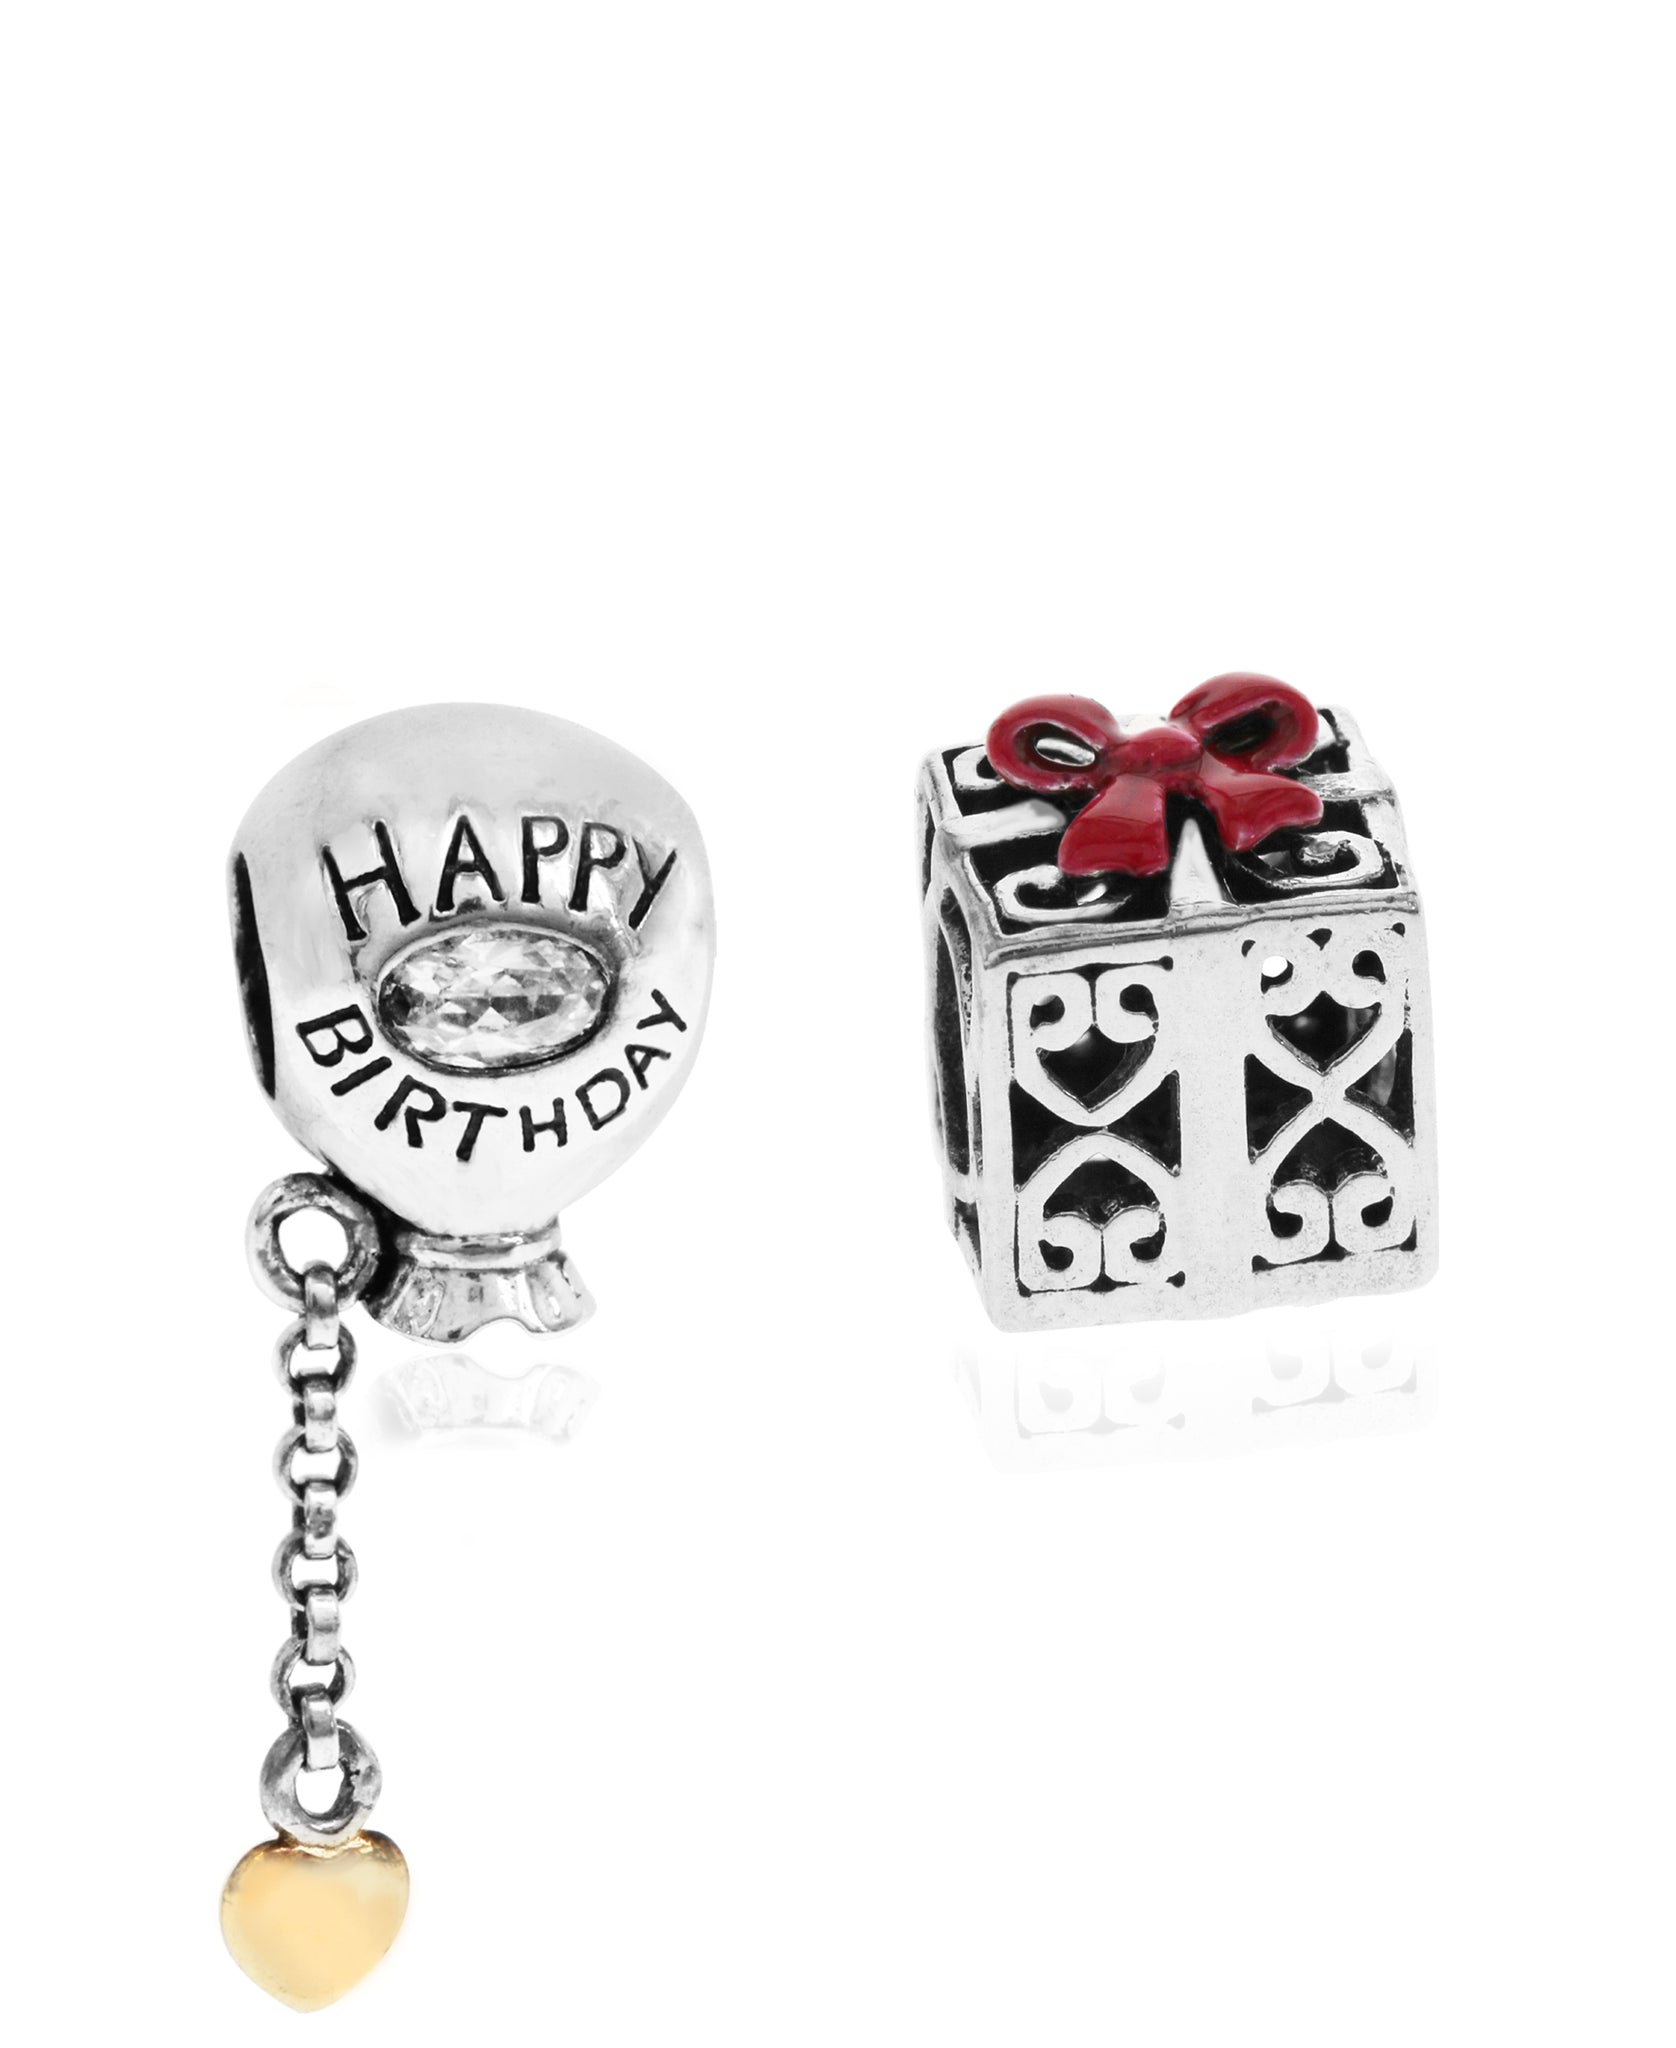 2-Pc. Set Happy Birthday Balloon & Gift Box Bead Charms in Sterling Silver & Gold-Plate - Rhona Sutton Jewellery